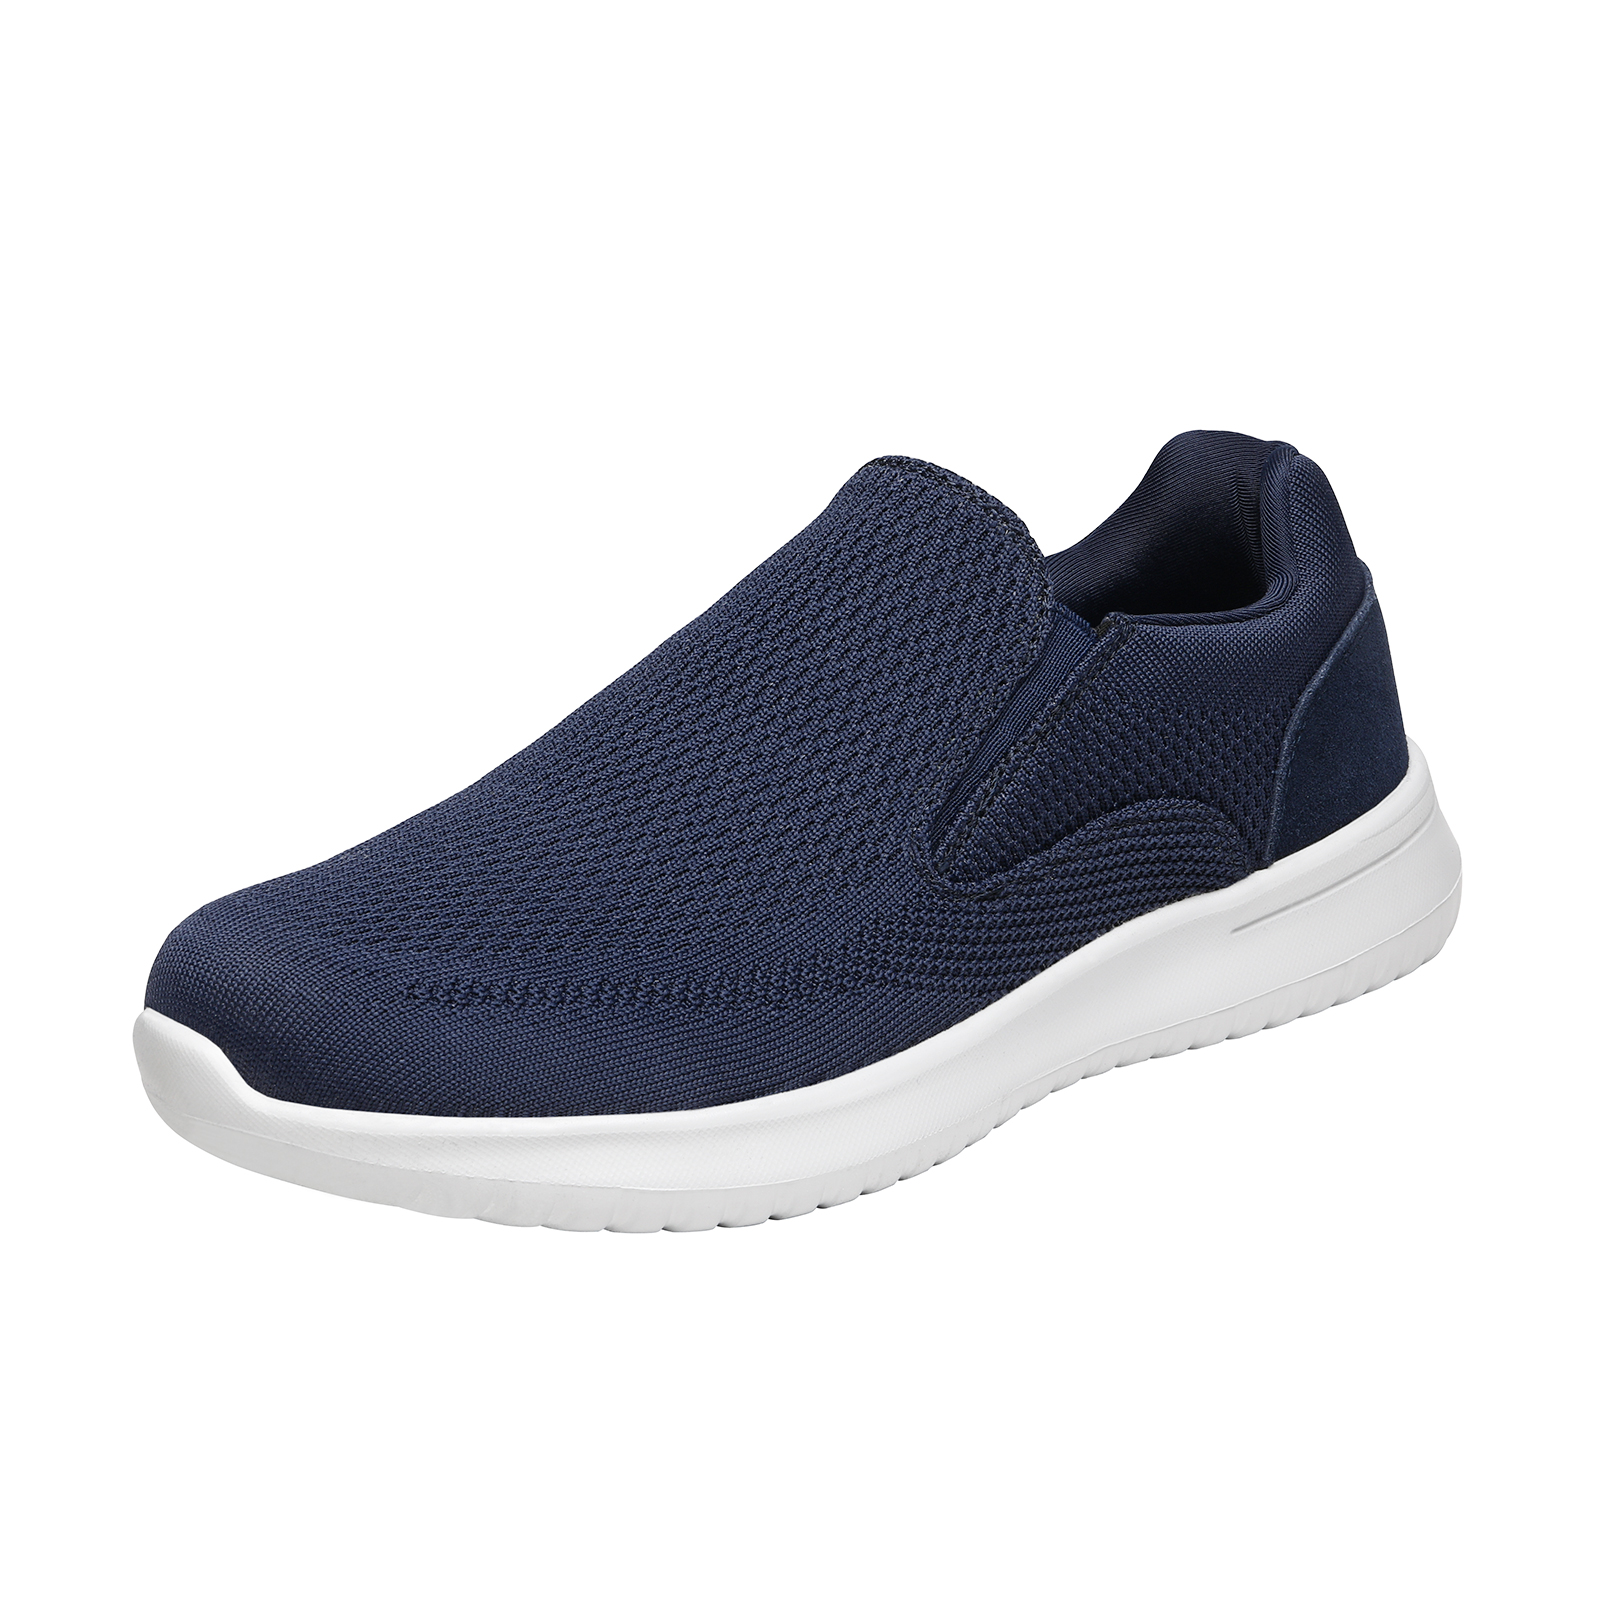 Bruno Marc Mens Slip On Loafers Casual Shoes Mesh Walking Shoes Fashion Sneakers Walk_Easy_01 Navy Size 10.5 - image 1 of 5